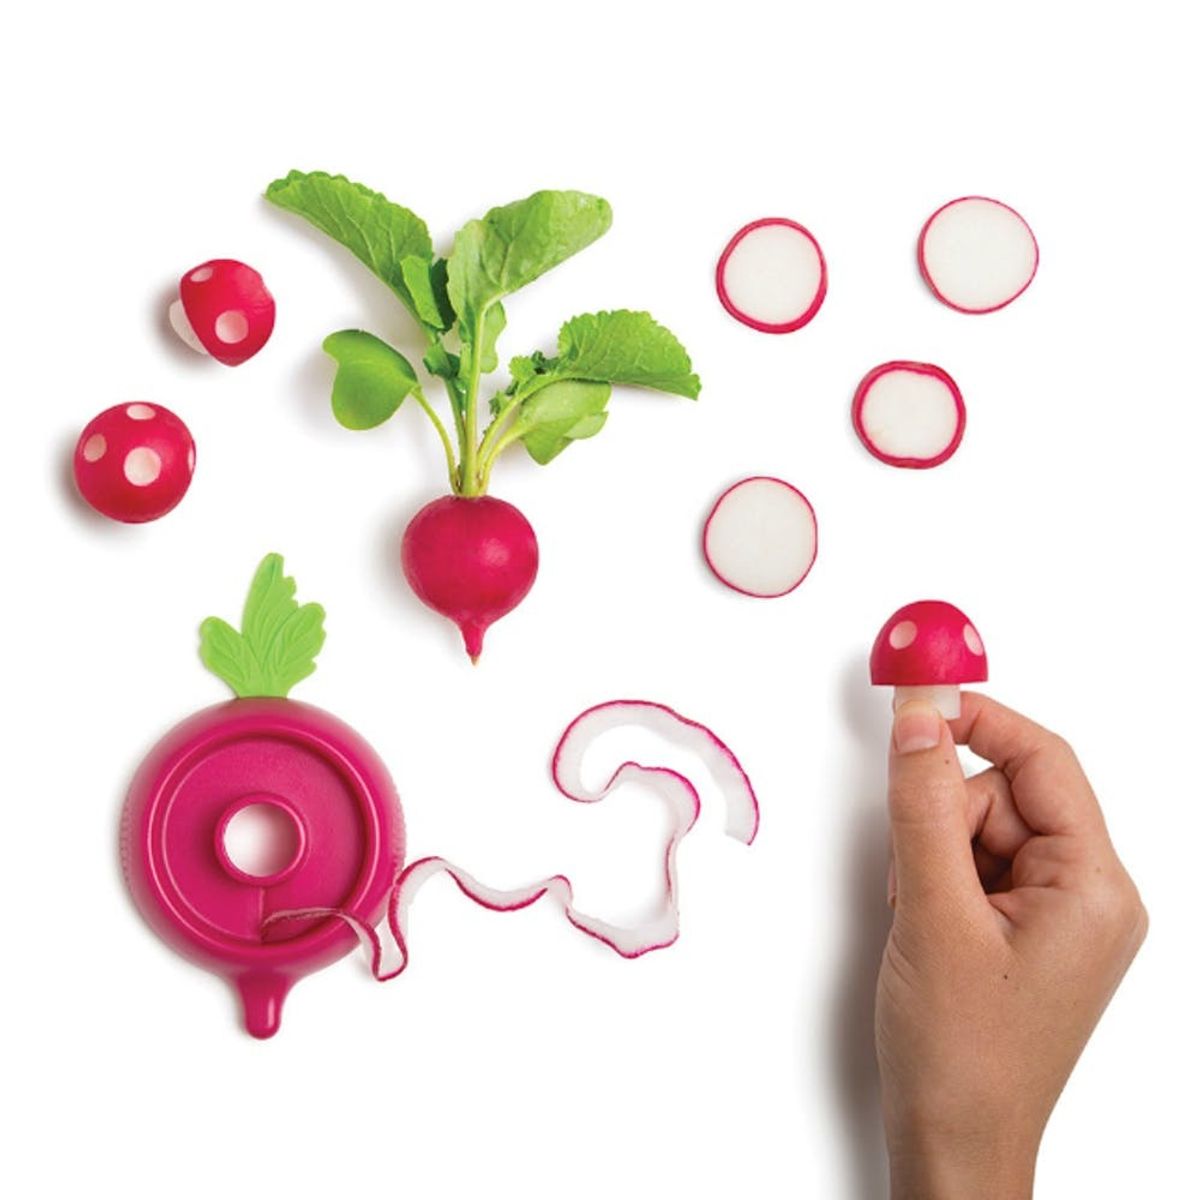 11 Magical Kitchen Gadgets That Turn Vegetables into Insta-Worthy Works of Art